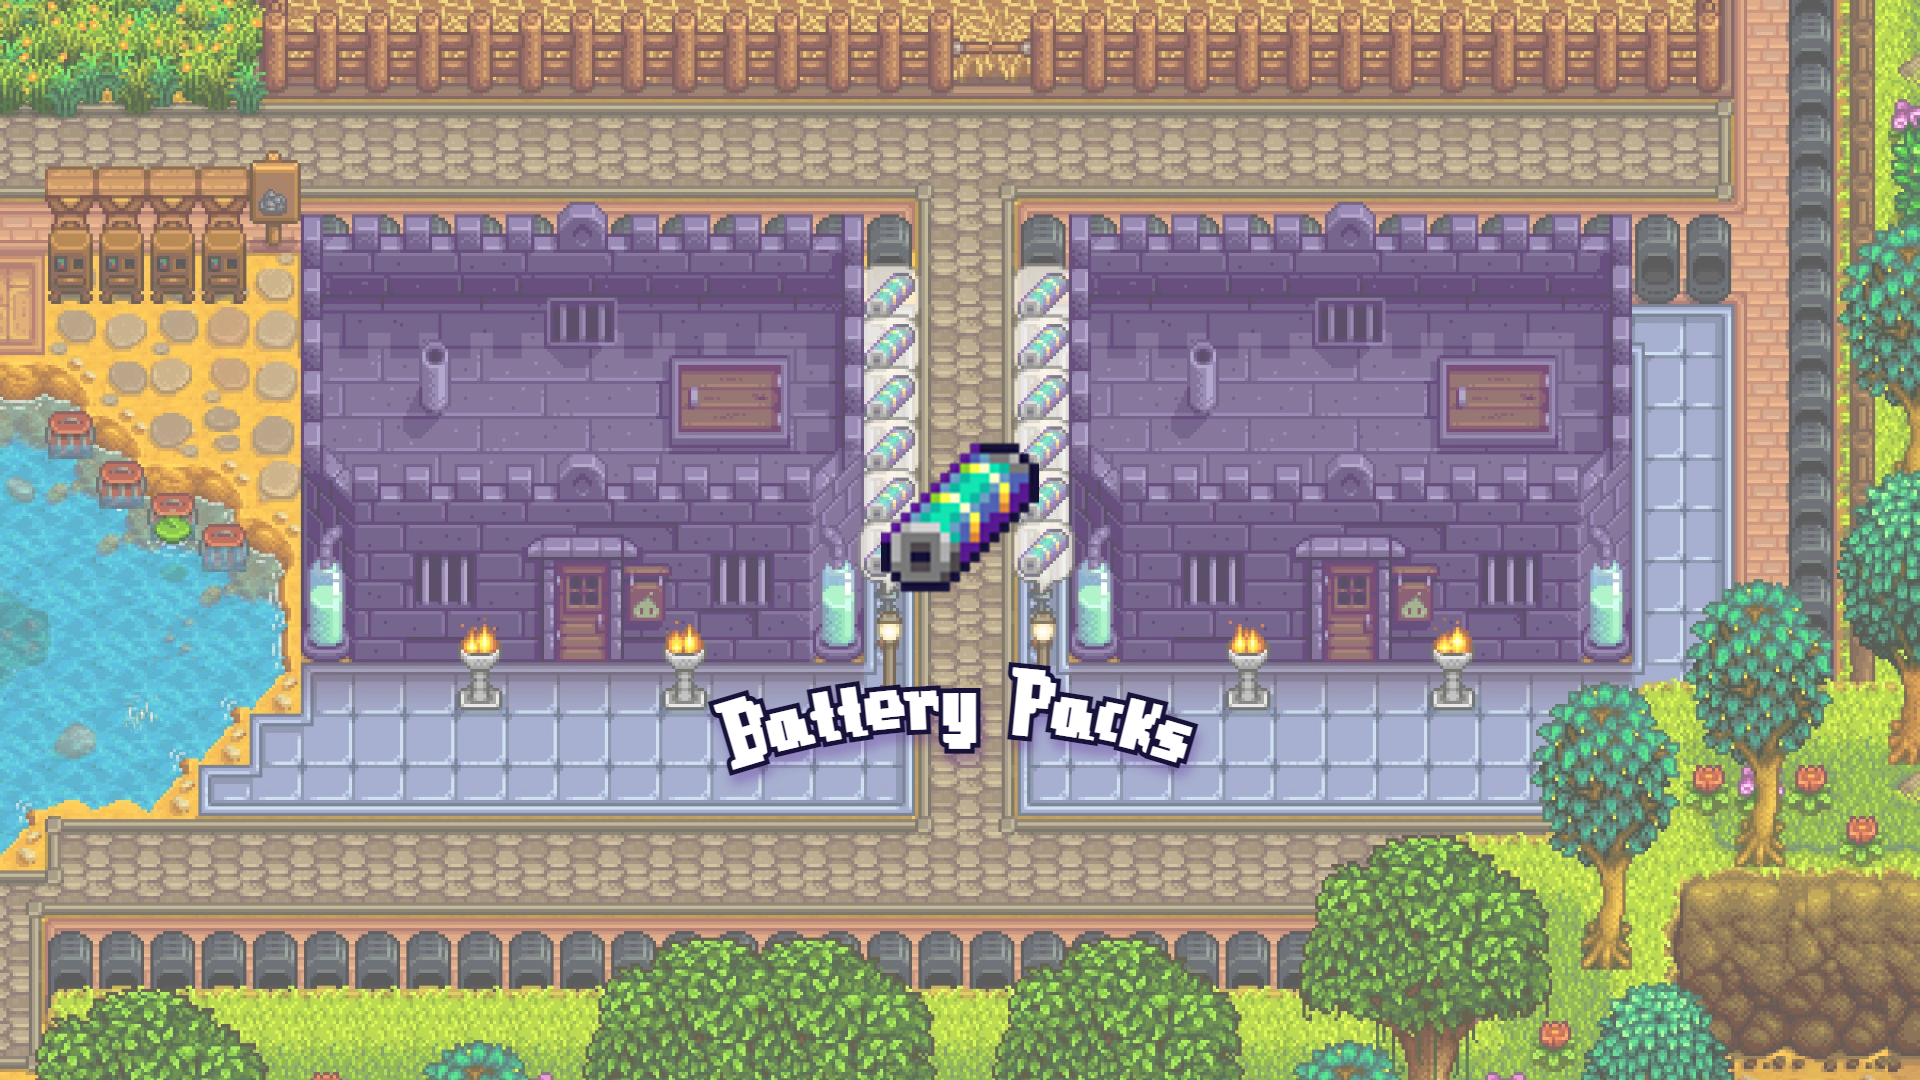 How to Get Battery Packs in Stardew Valley